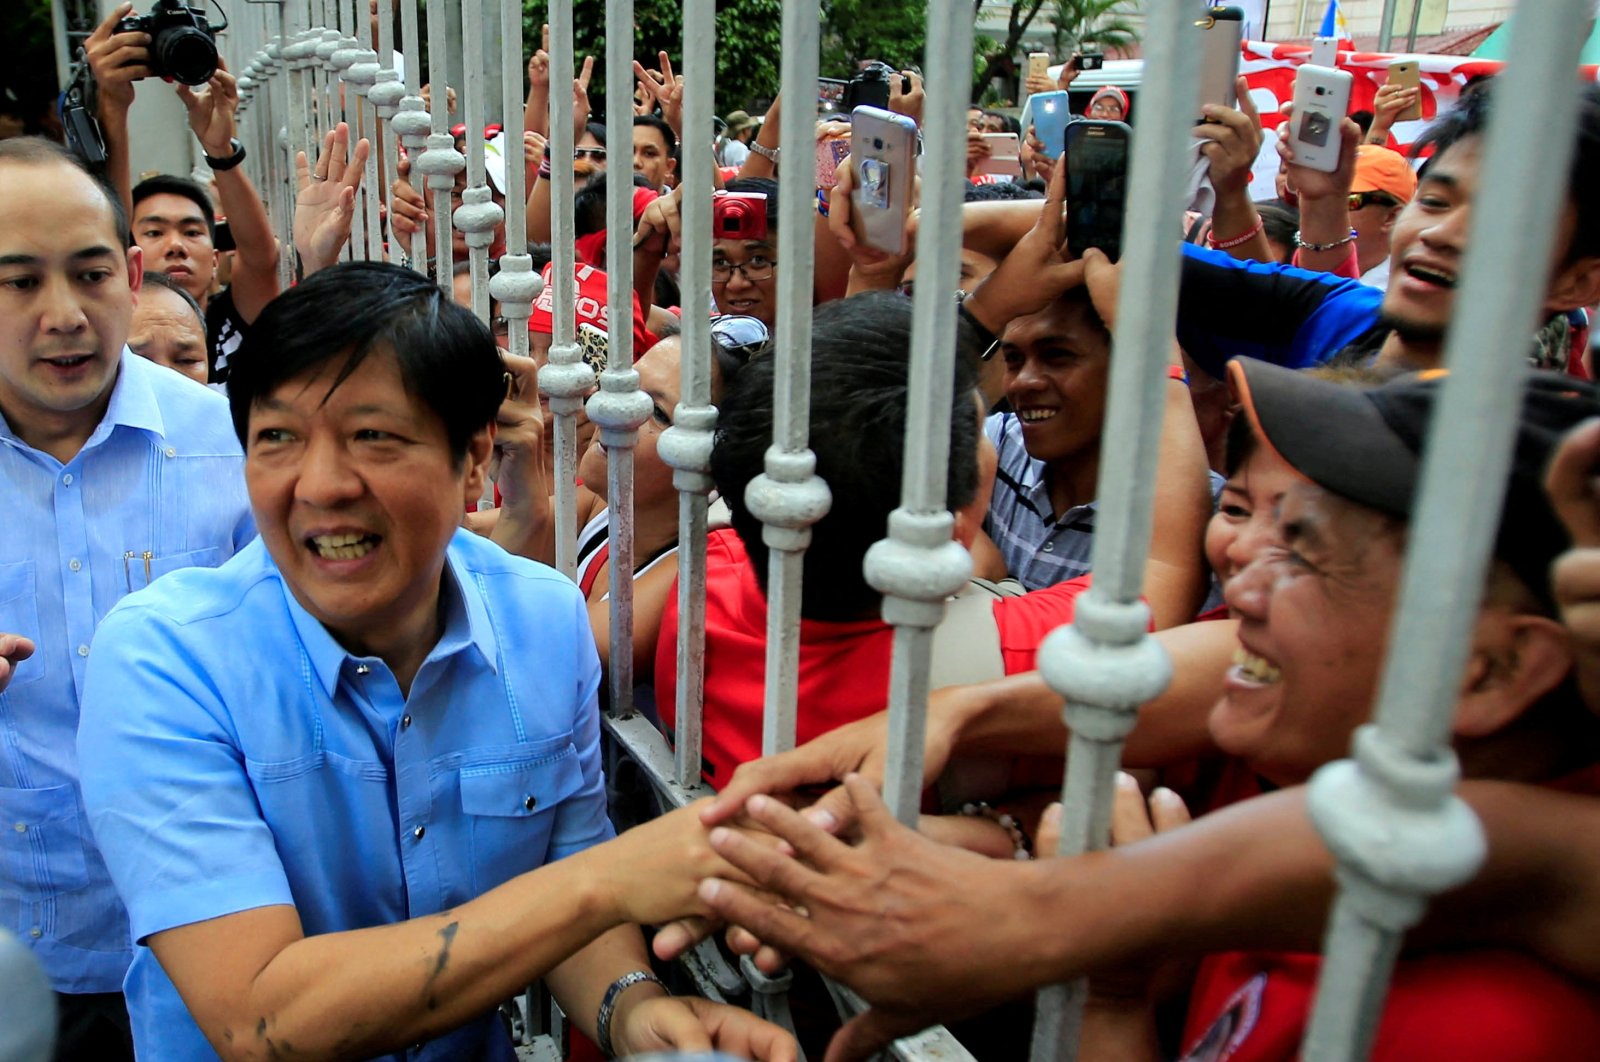 Former senator Ferdinand "Bongbong" Marcos Jr., son of late former dictator Ferdinand Marcos, is greeted by his supporters upon his arrival at the Supreme Court in Manila, Philippines, April 17, 2017. (Reuters Photo)